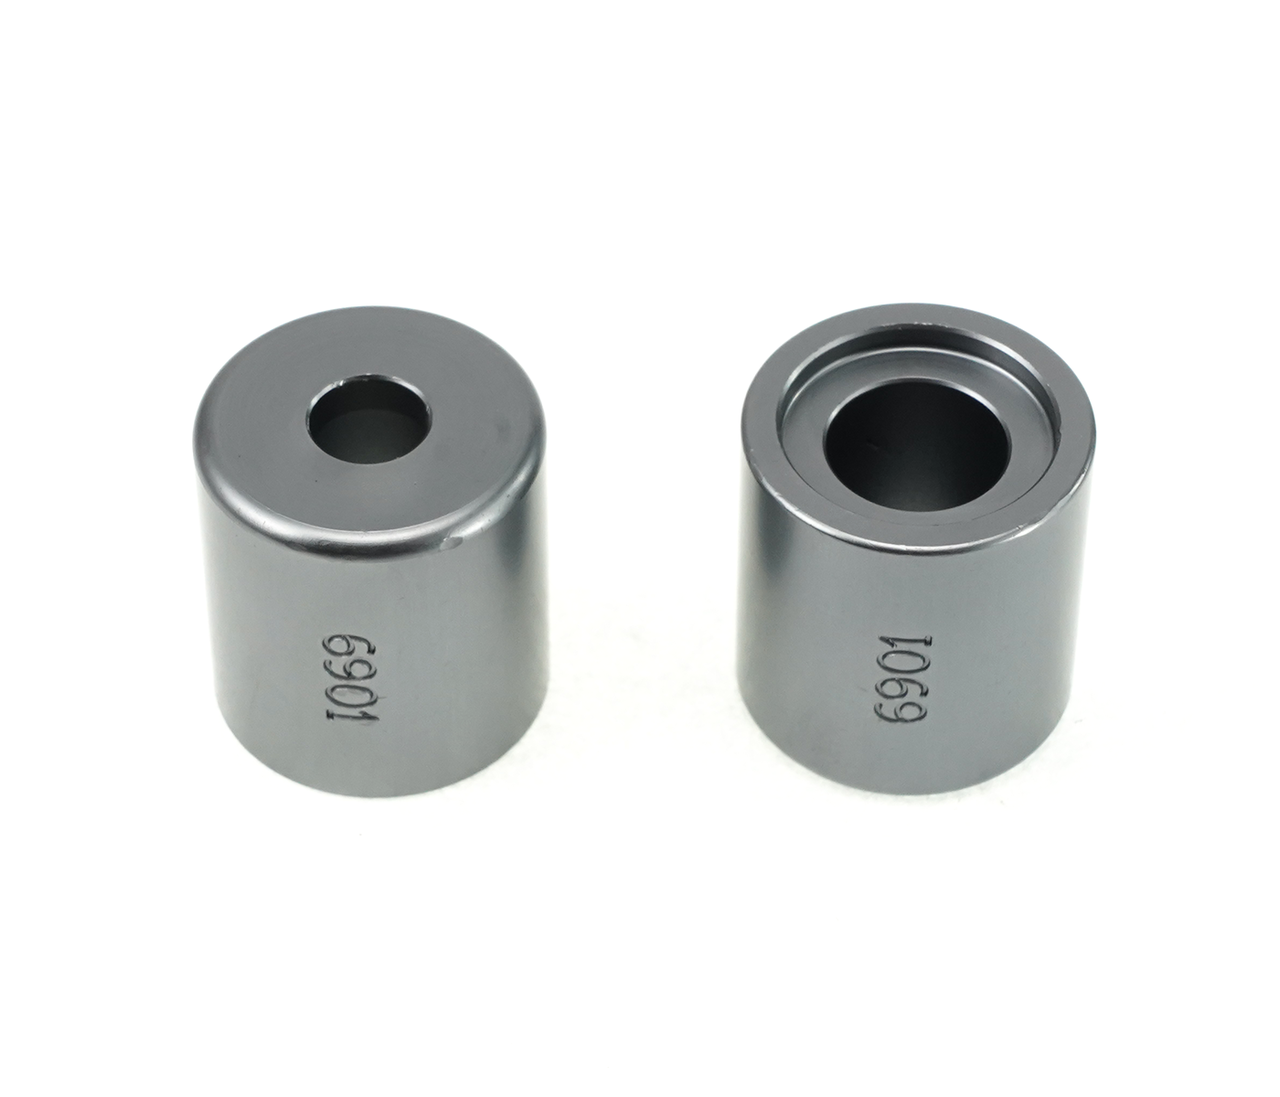 Enduro HT 6901 Outer - Outer Bearing Guide for Bearing Press (BRT-005 or BRT-050) - single guide only